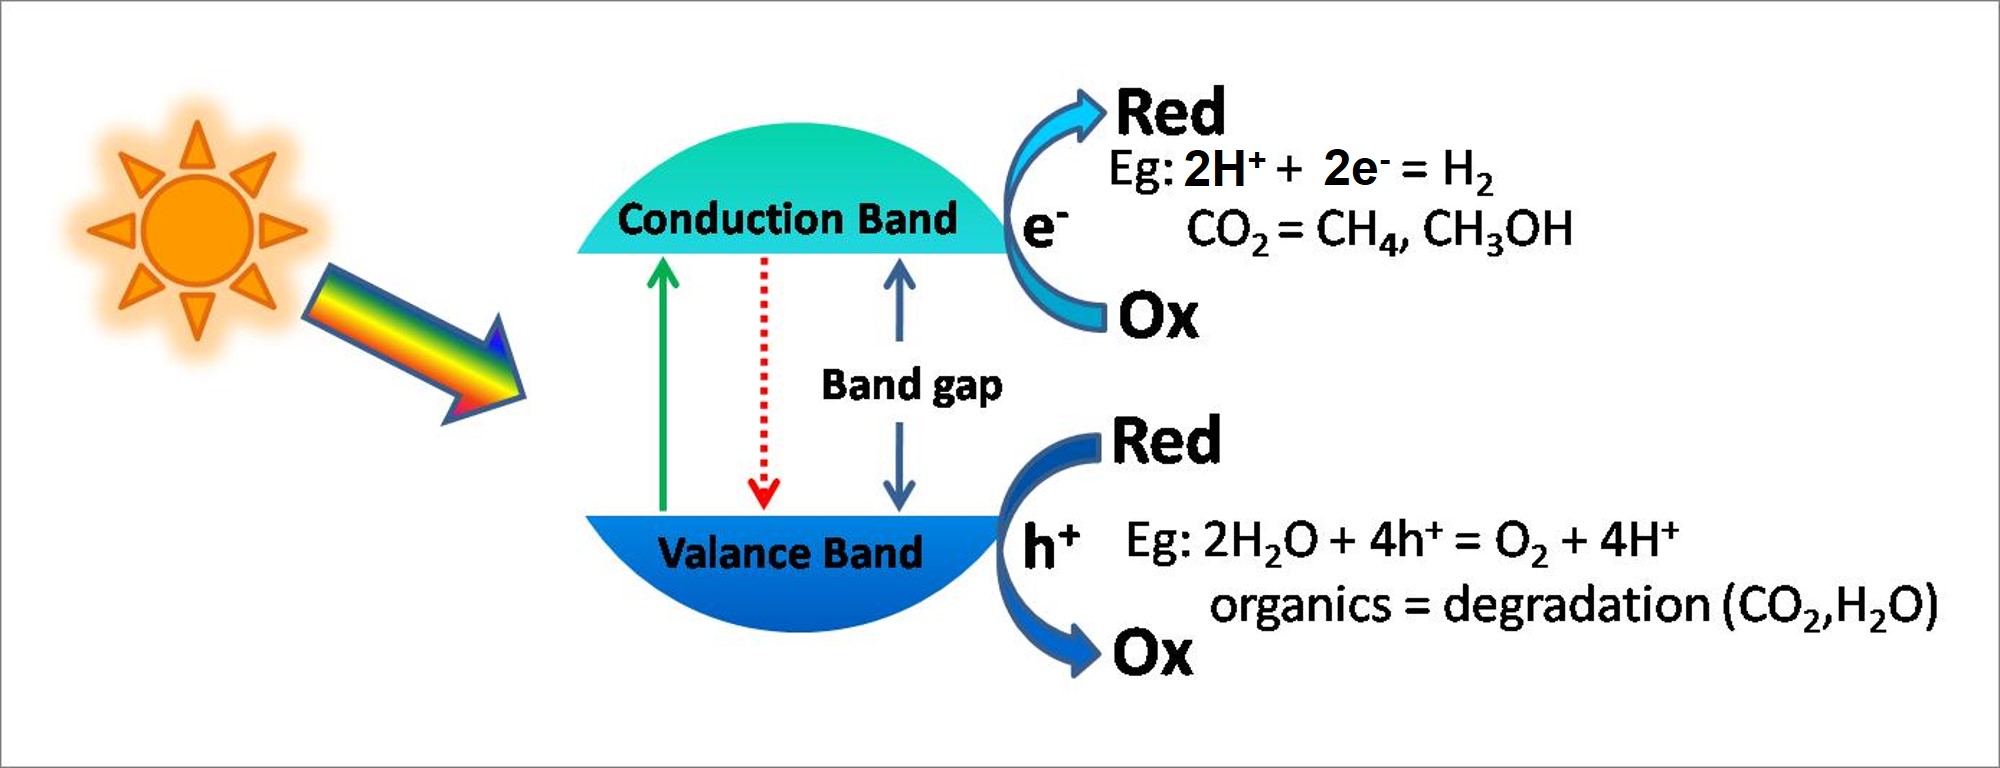 Photocatalytic scheme of the production of hydrogen or environmental remediation using TiO2